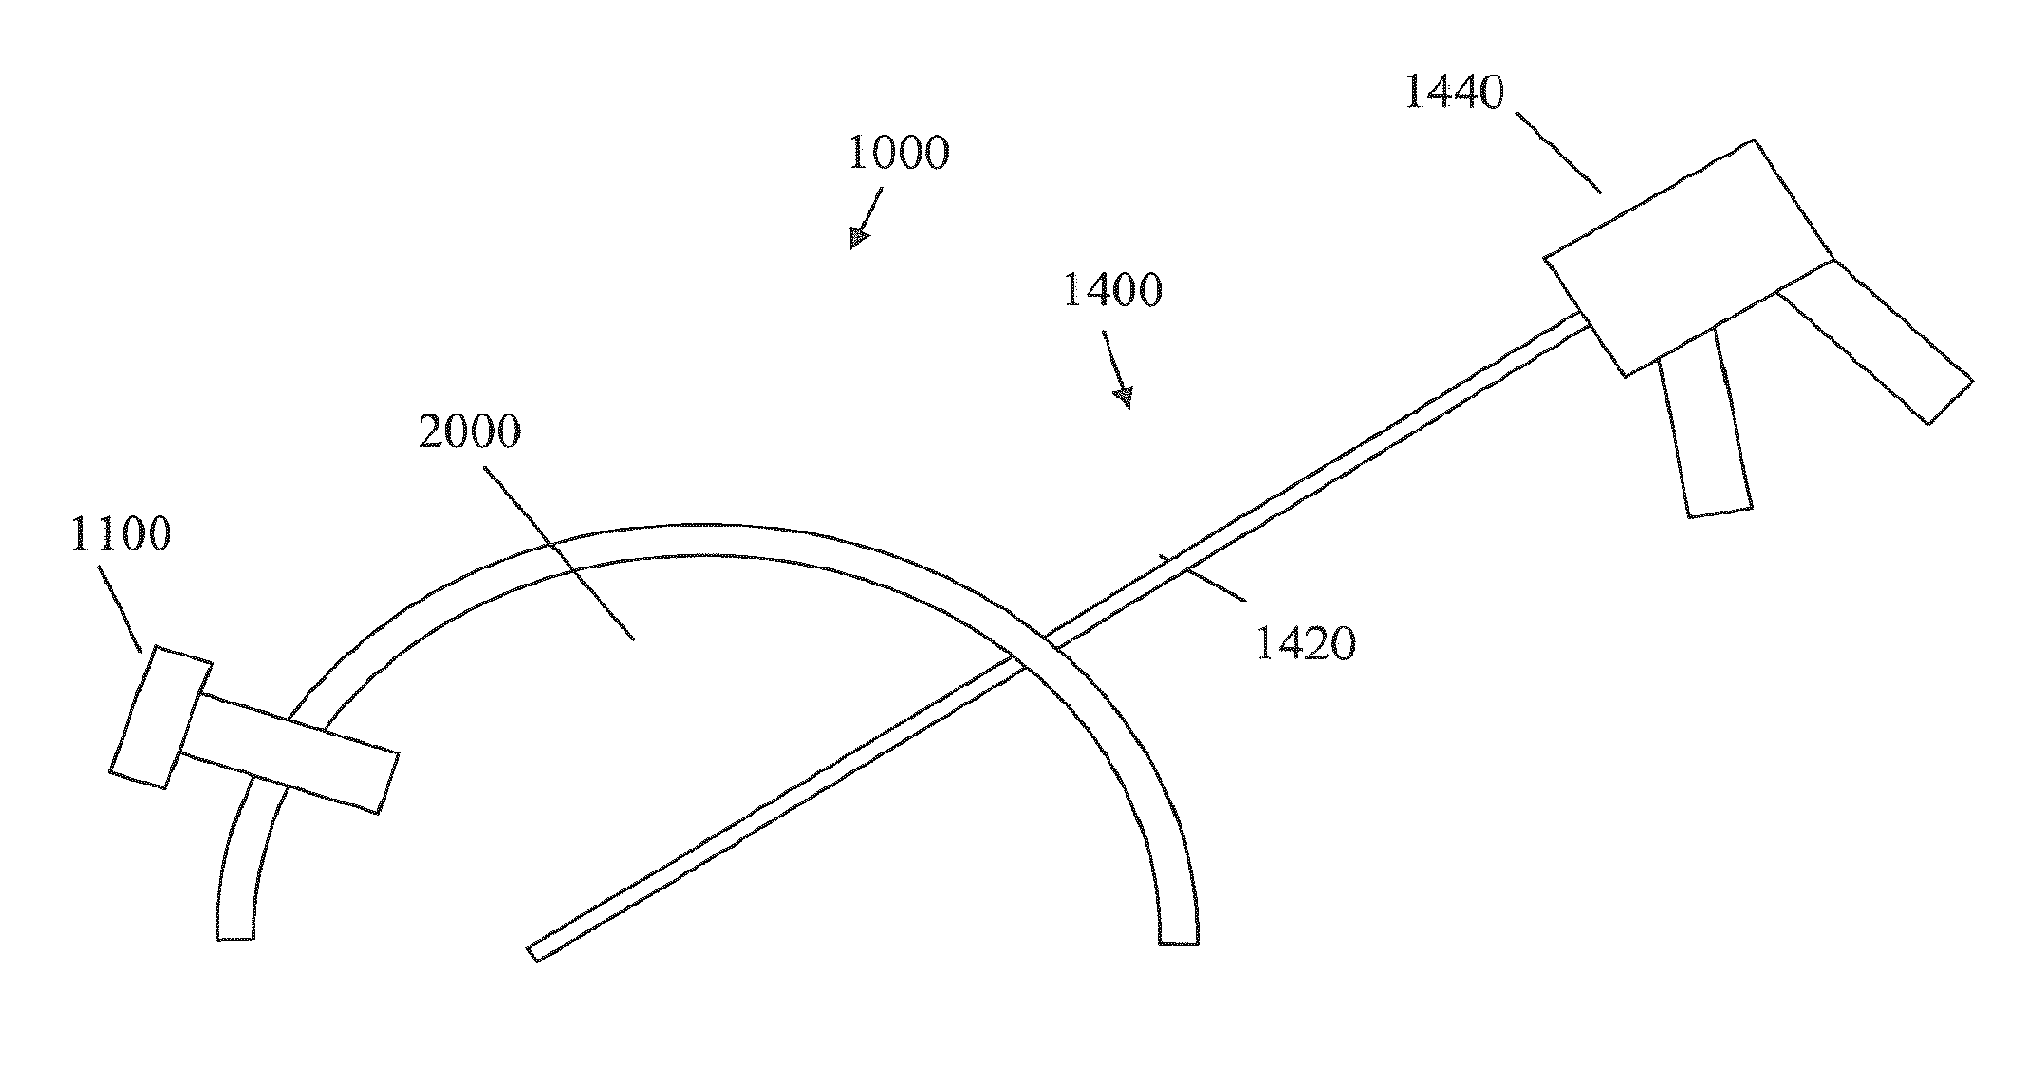 System and method of deploying an elongate unit in a body cavity